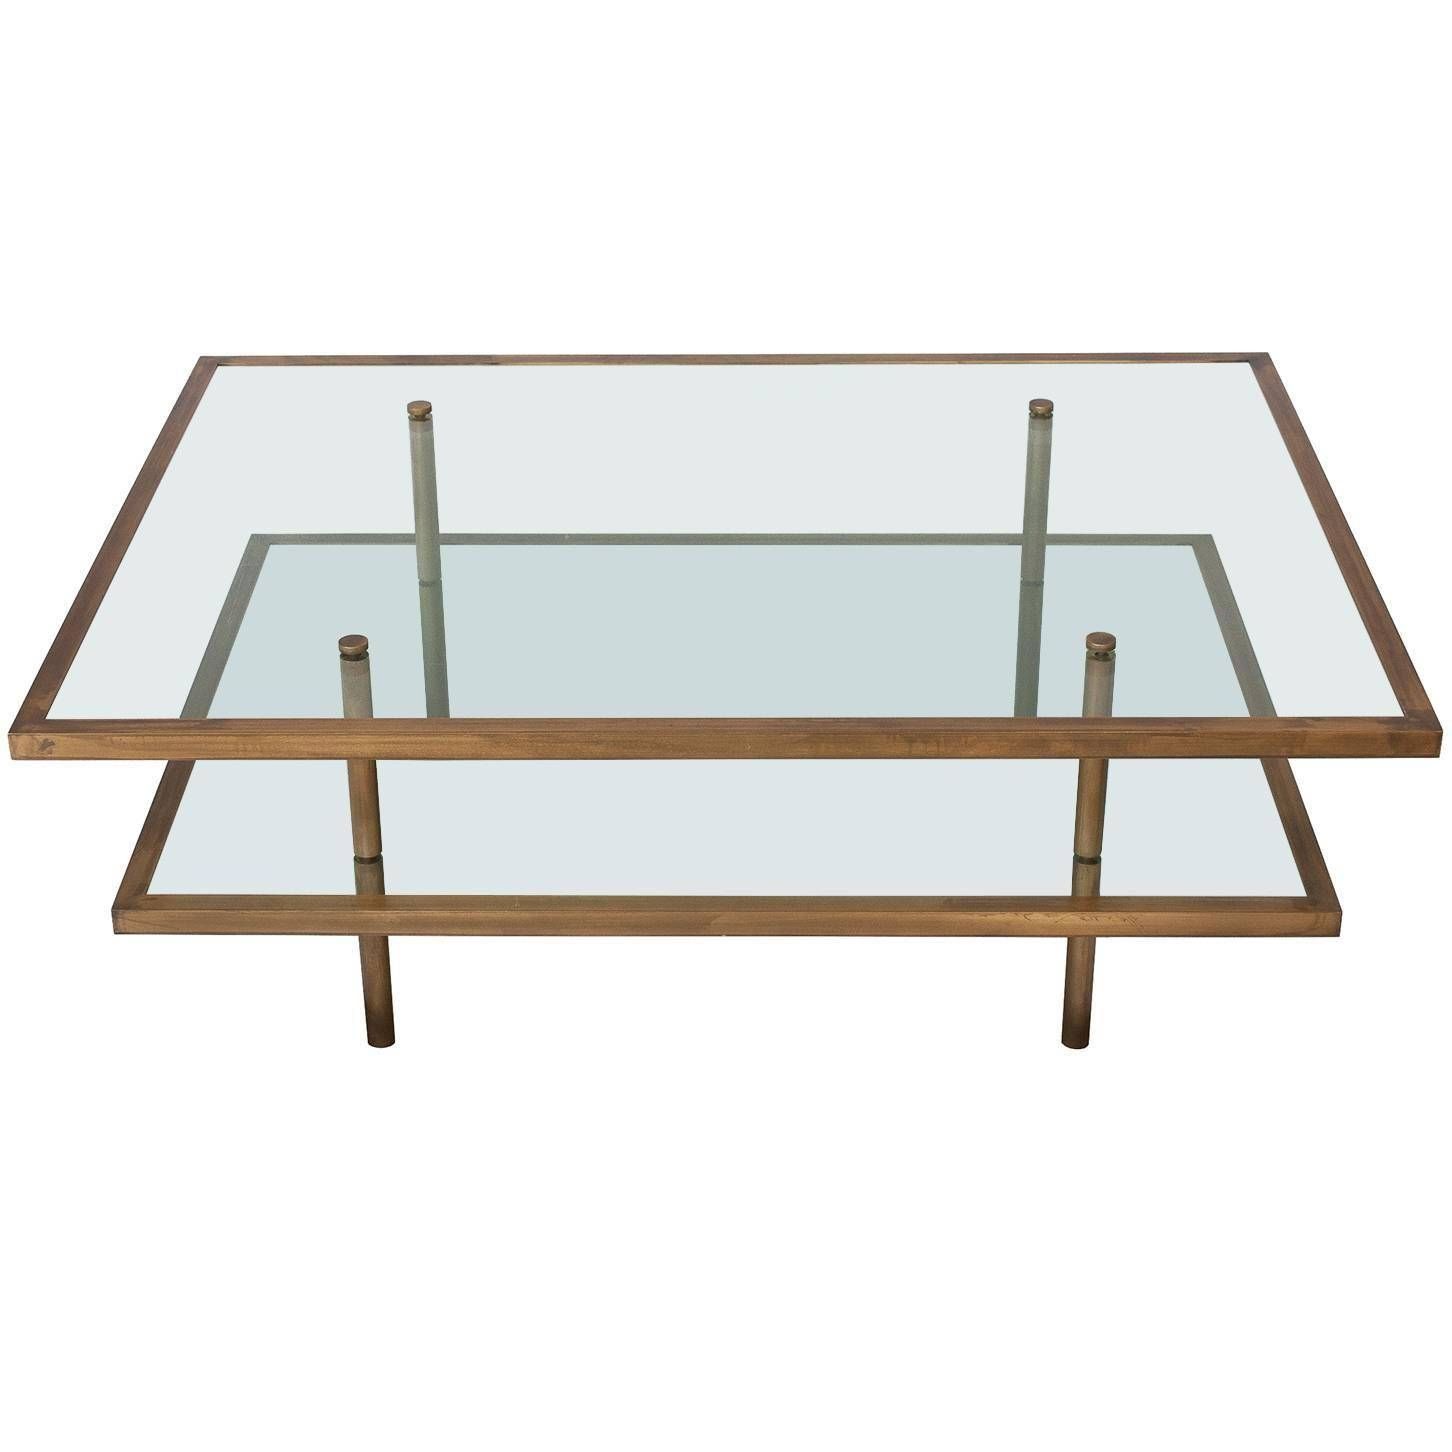 French Bronze And Glass Two Tier Coffee Table At 1stdibs Inside Bronze And Glass Coffee Tables (View 2 of 30)